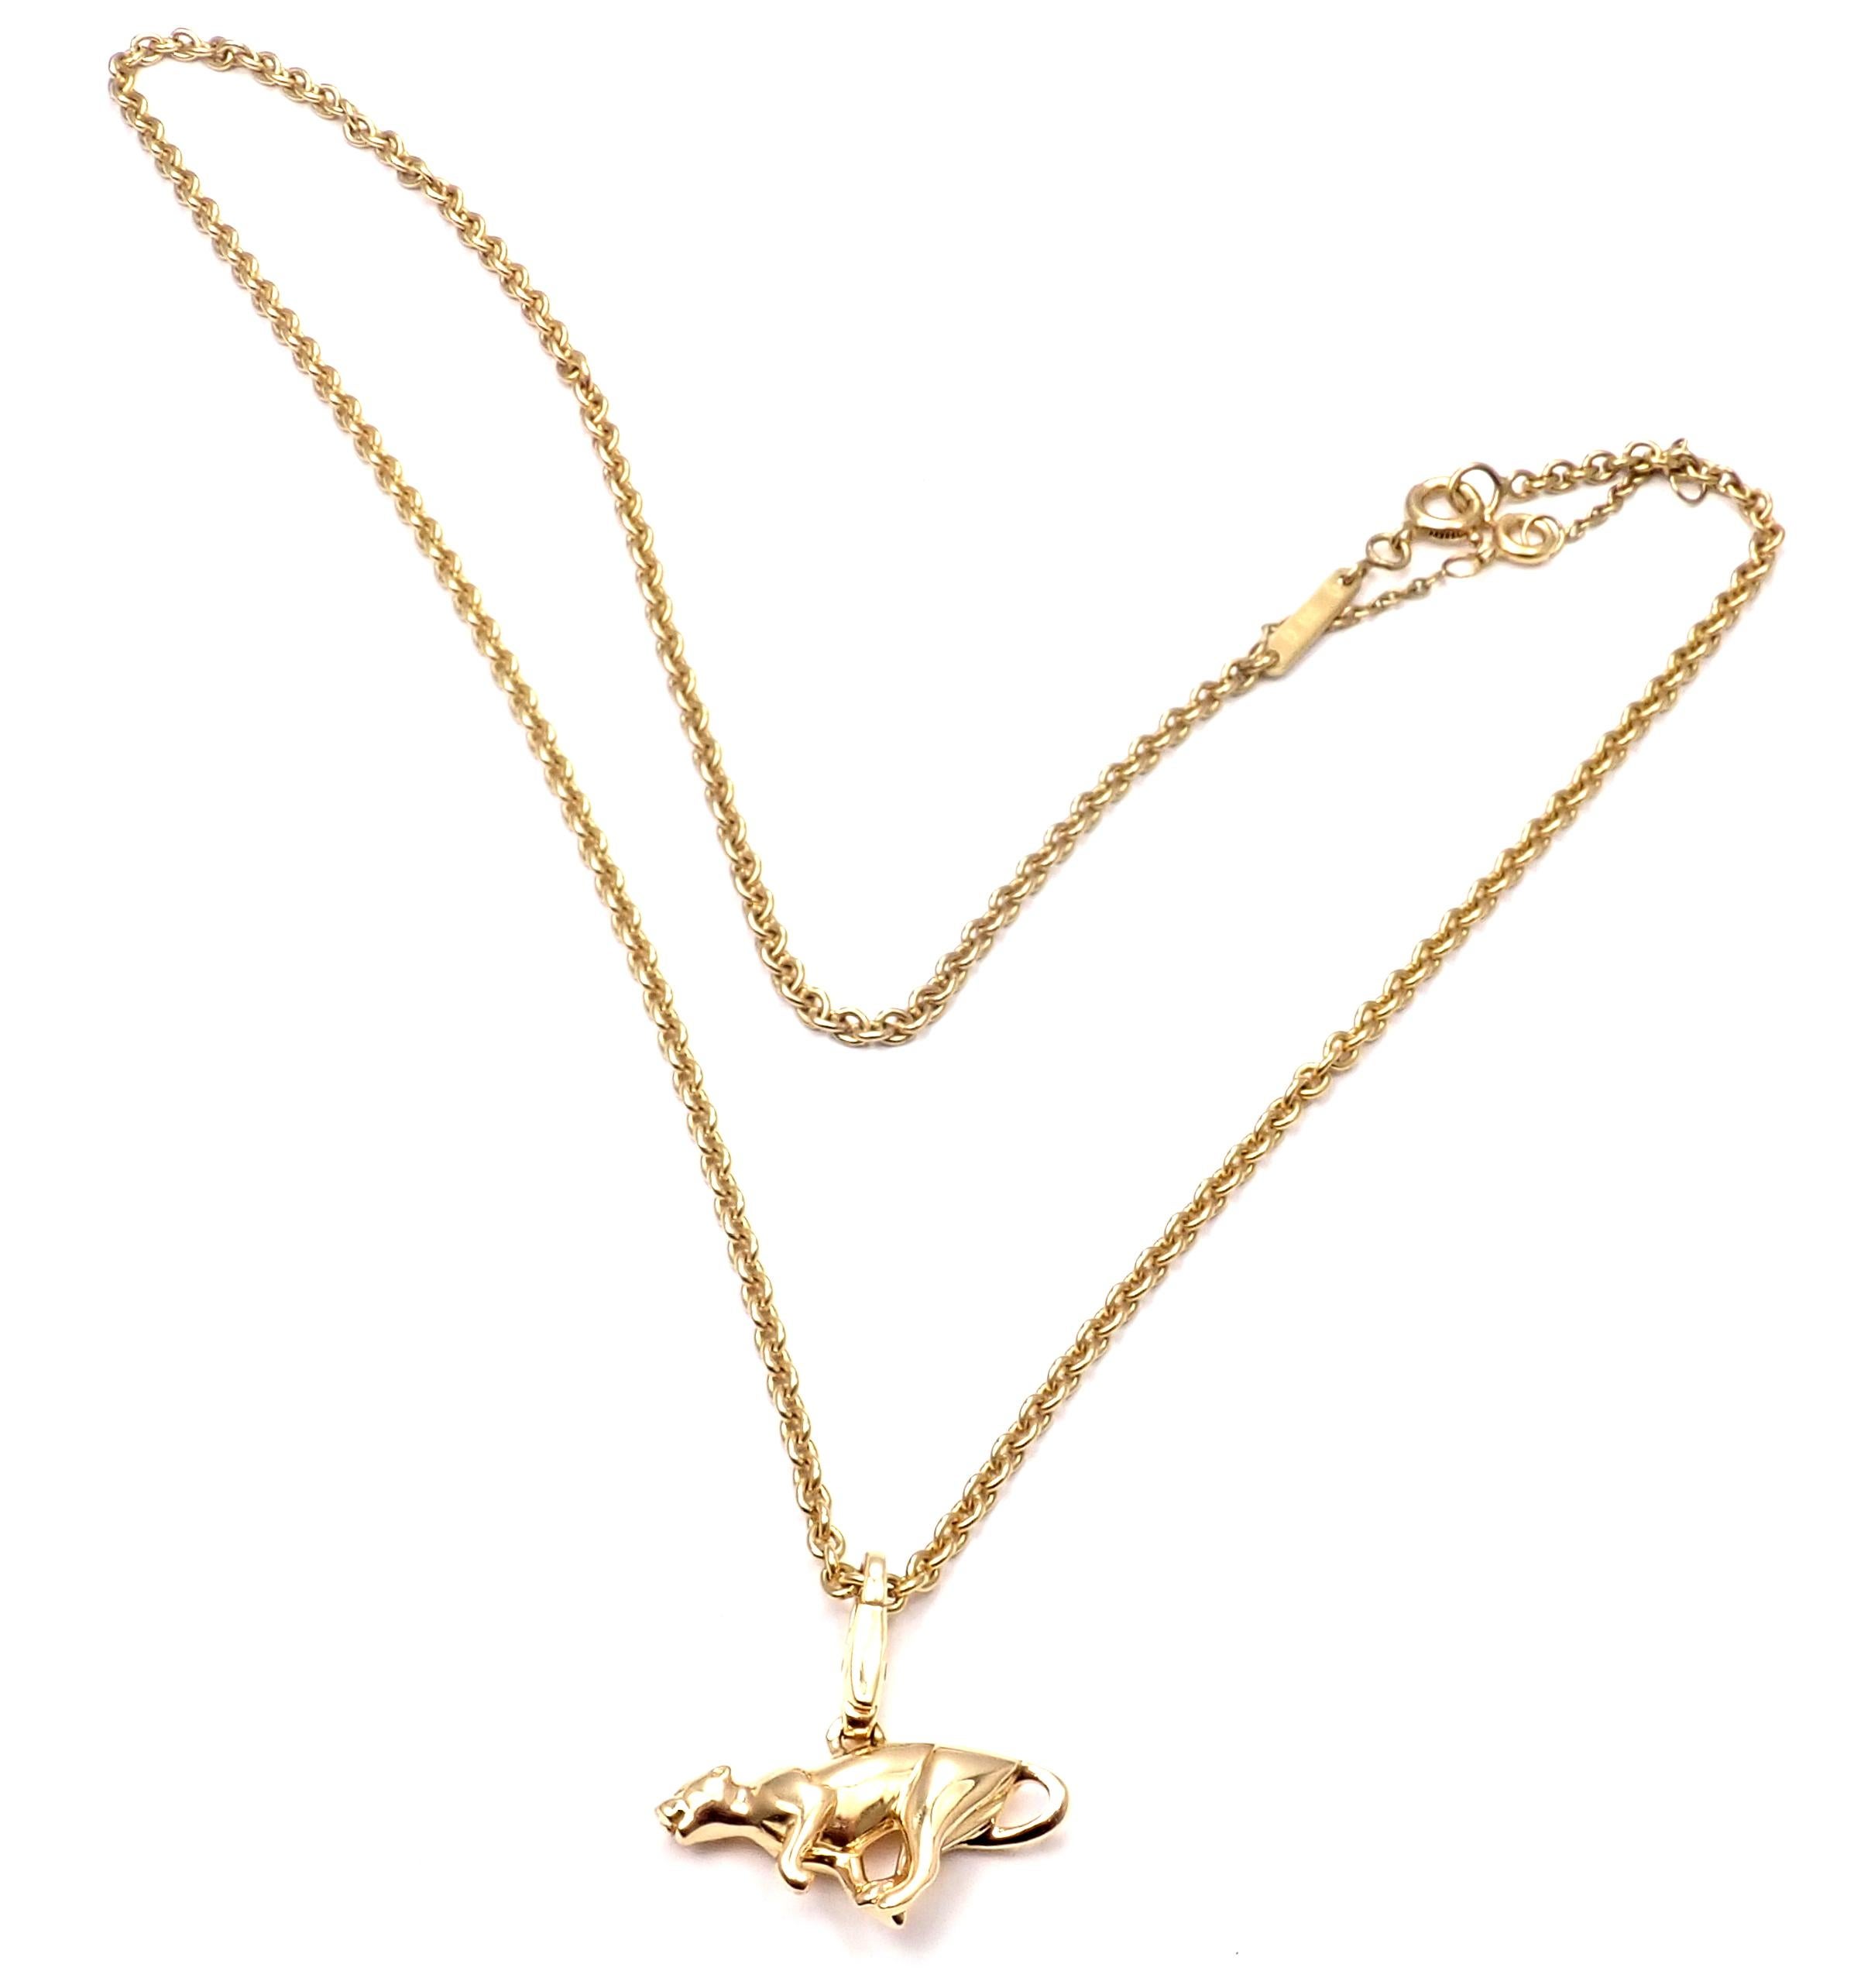 Women's or Men's Cartier Panther Pendant Link Yellow Gold Chain Necklace